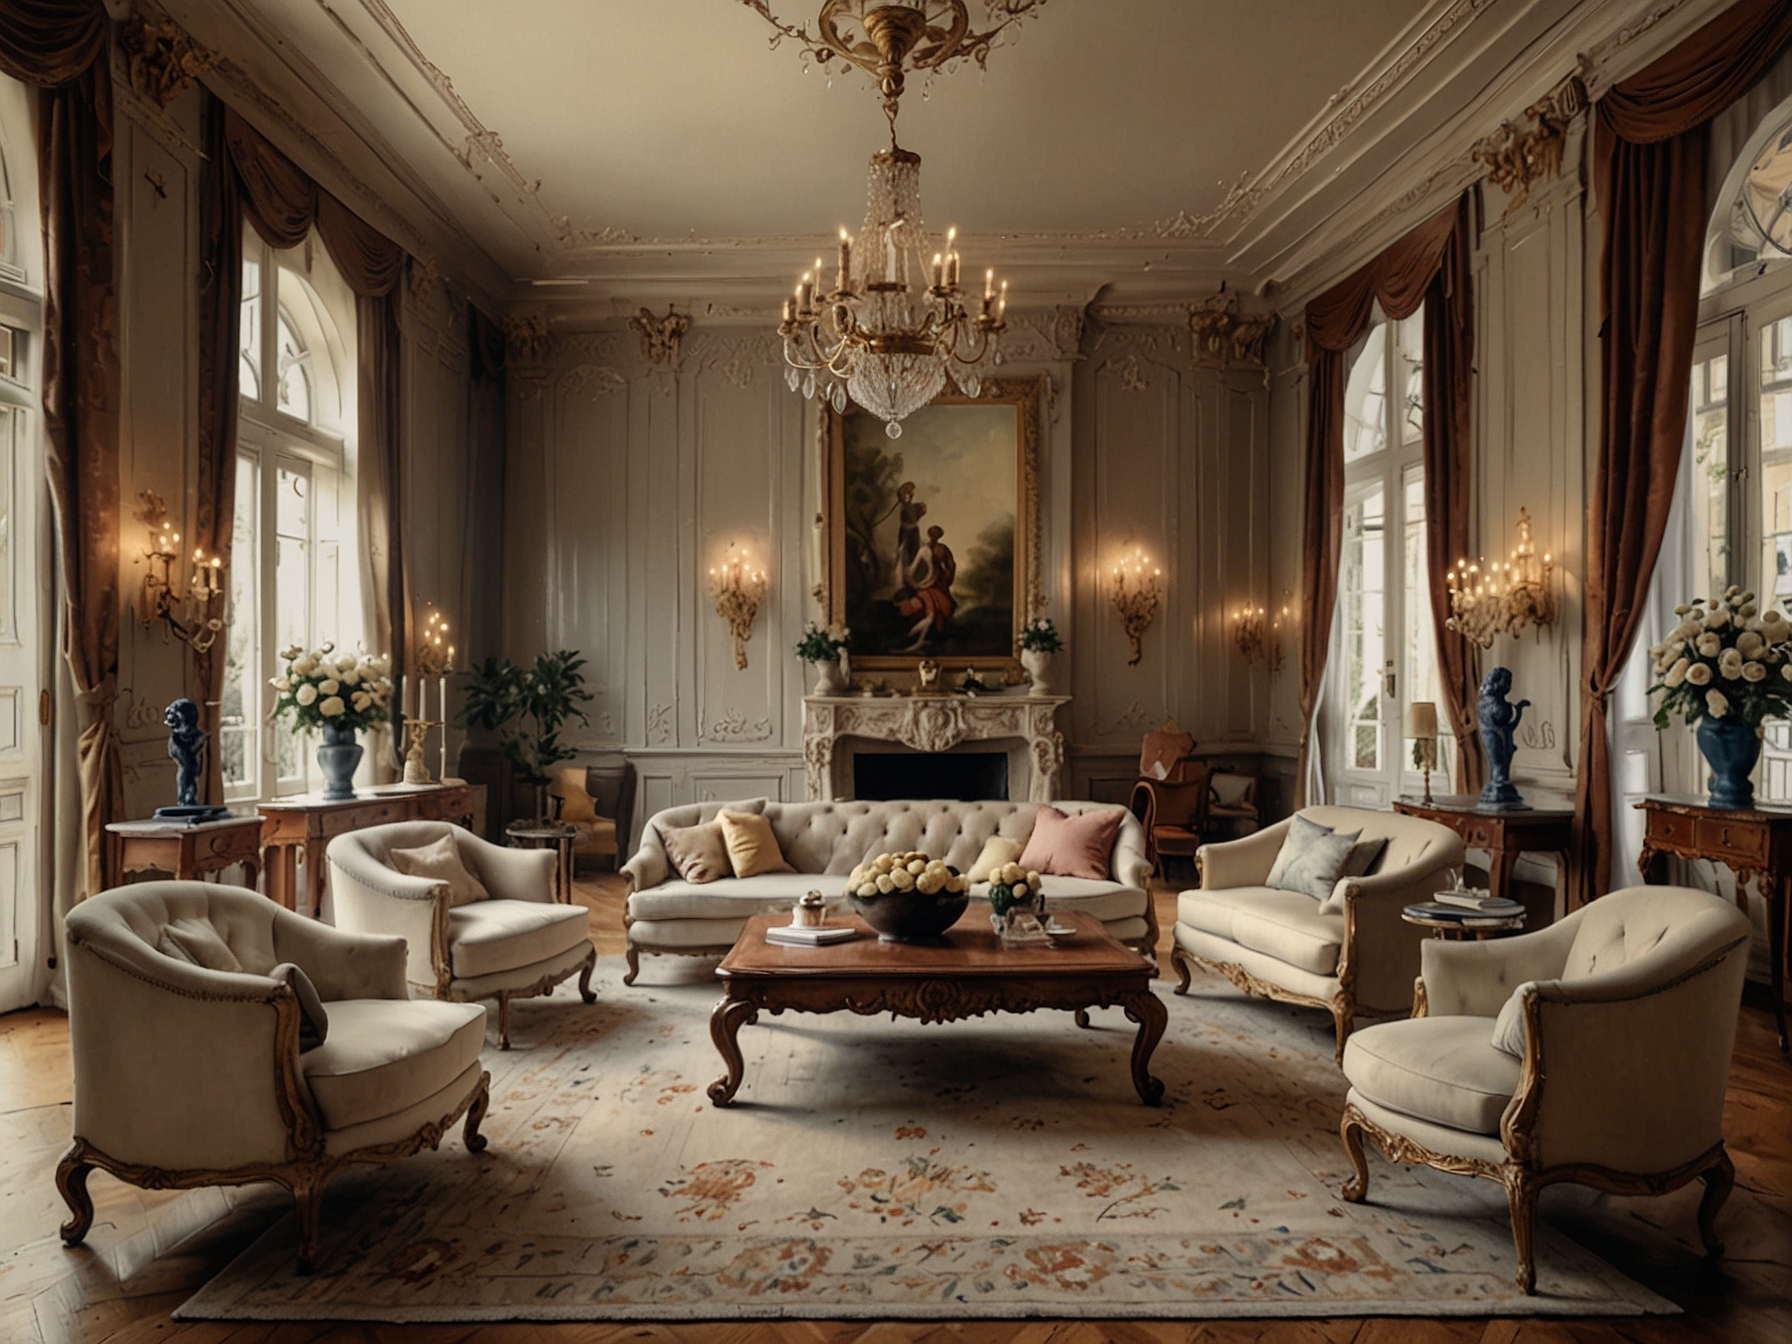 The opulent living room inside the French Norman-style mansion, featuring high ceilings, intricate moldings, large windows allowing natural light, and classical furniture, embodying timeless elegance.